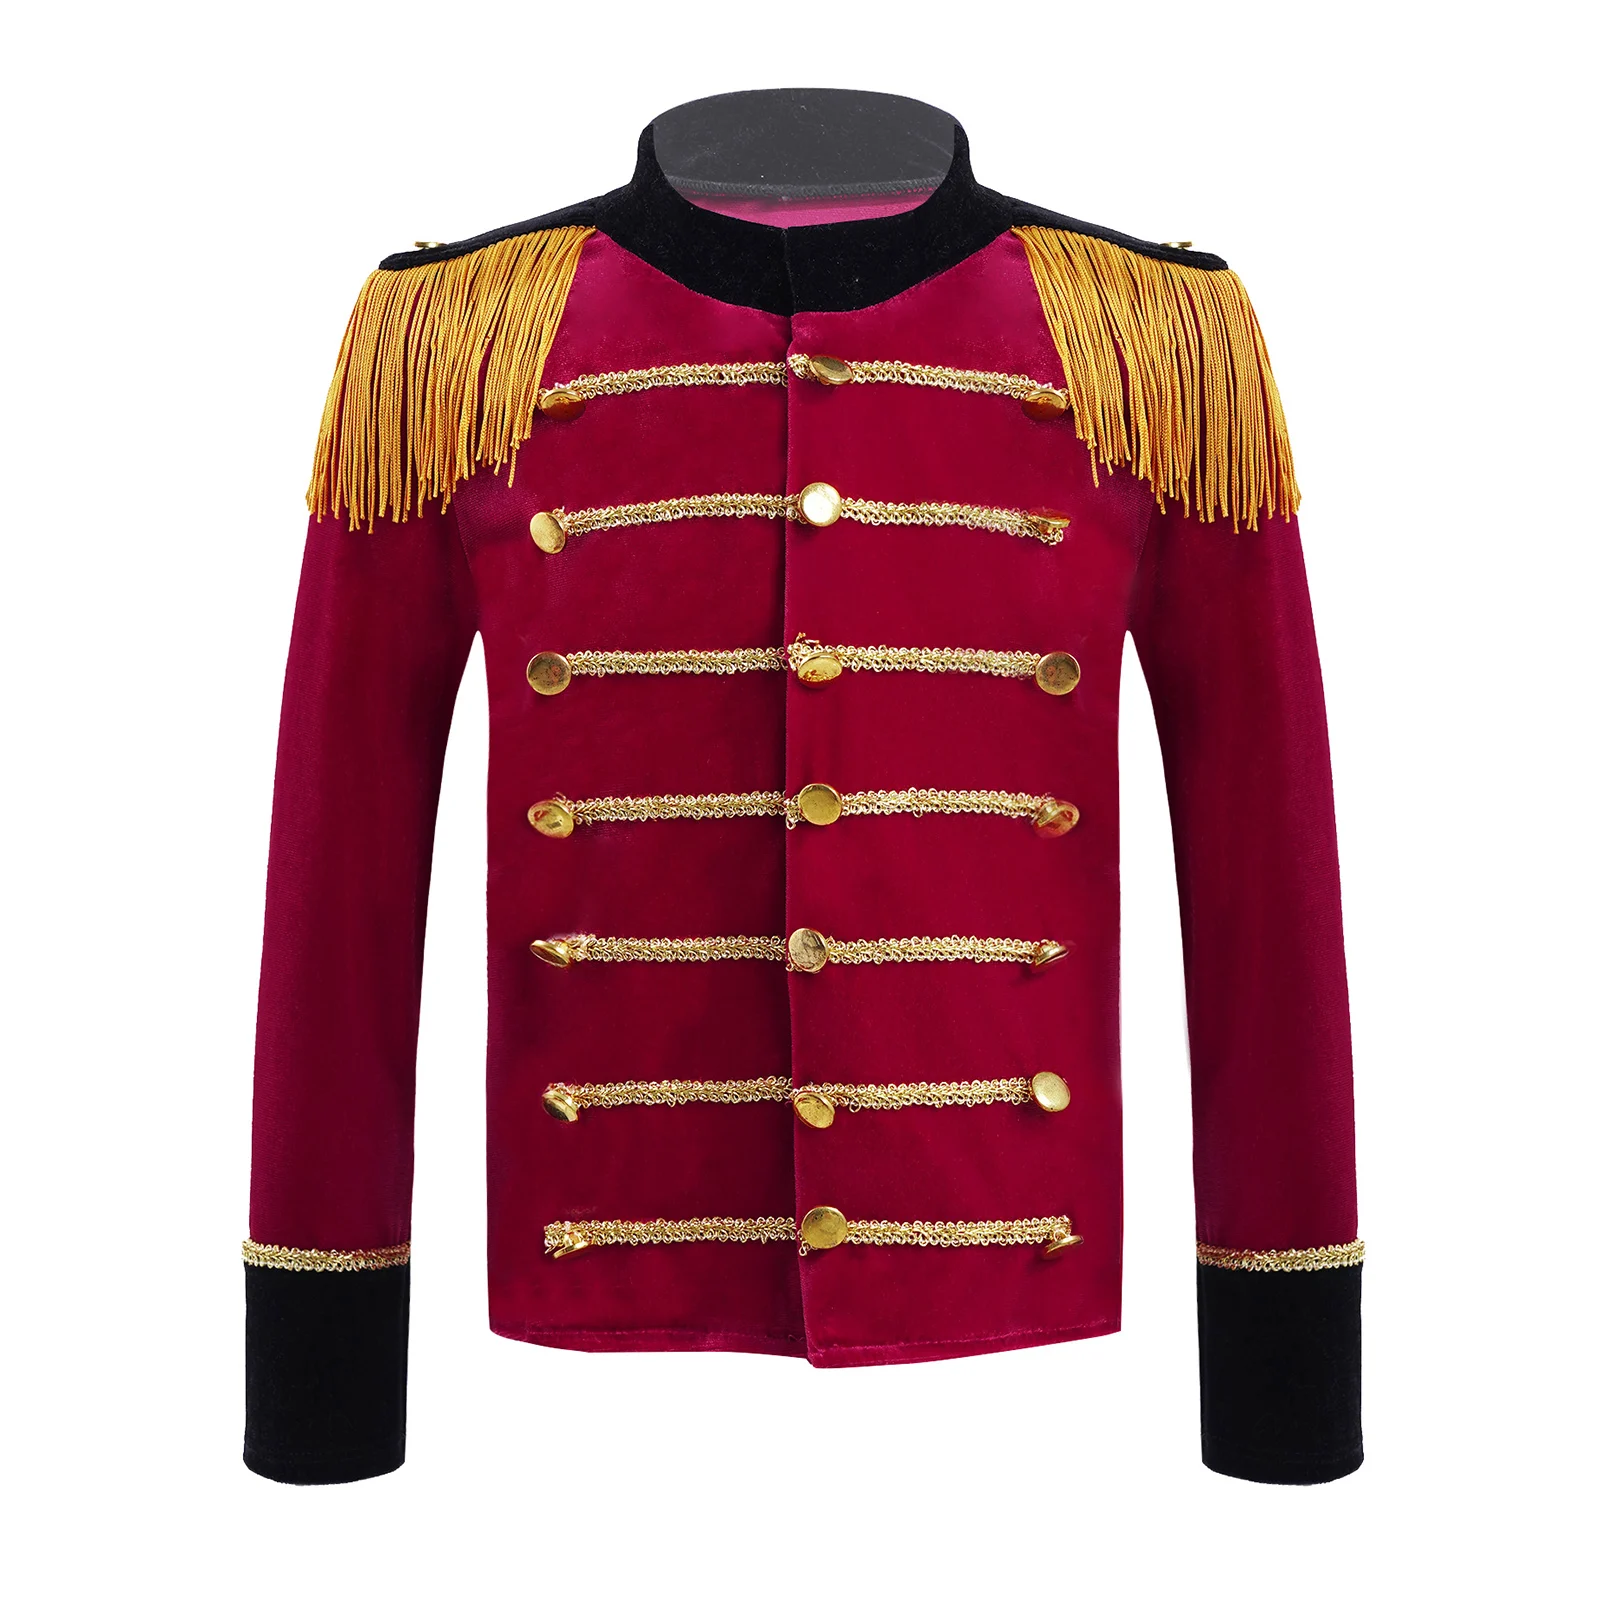 Kids Boys Circus Coat Ringmaster Costumes Deluxe Royal Guard Jacket Children Role Play Long Sleeves Tassels Drum Tops Tailcoat